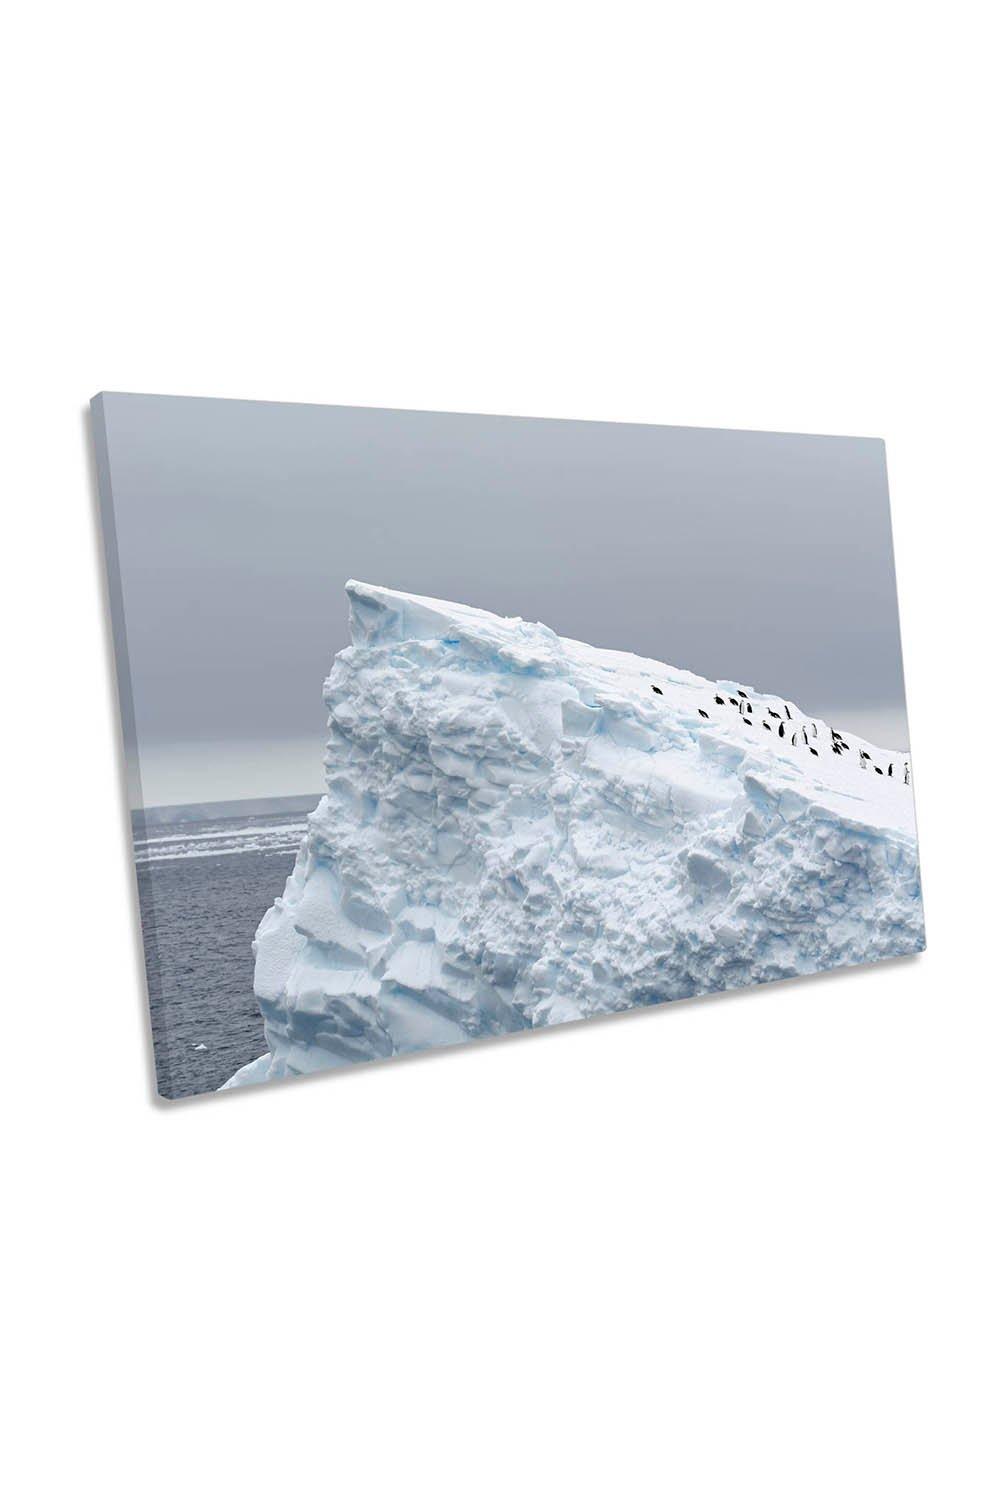 The Giant Slide Penguins Iceberg Canvas Wall Art Picture Print